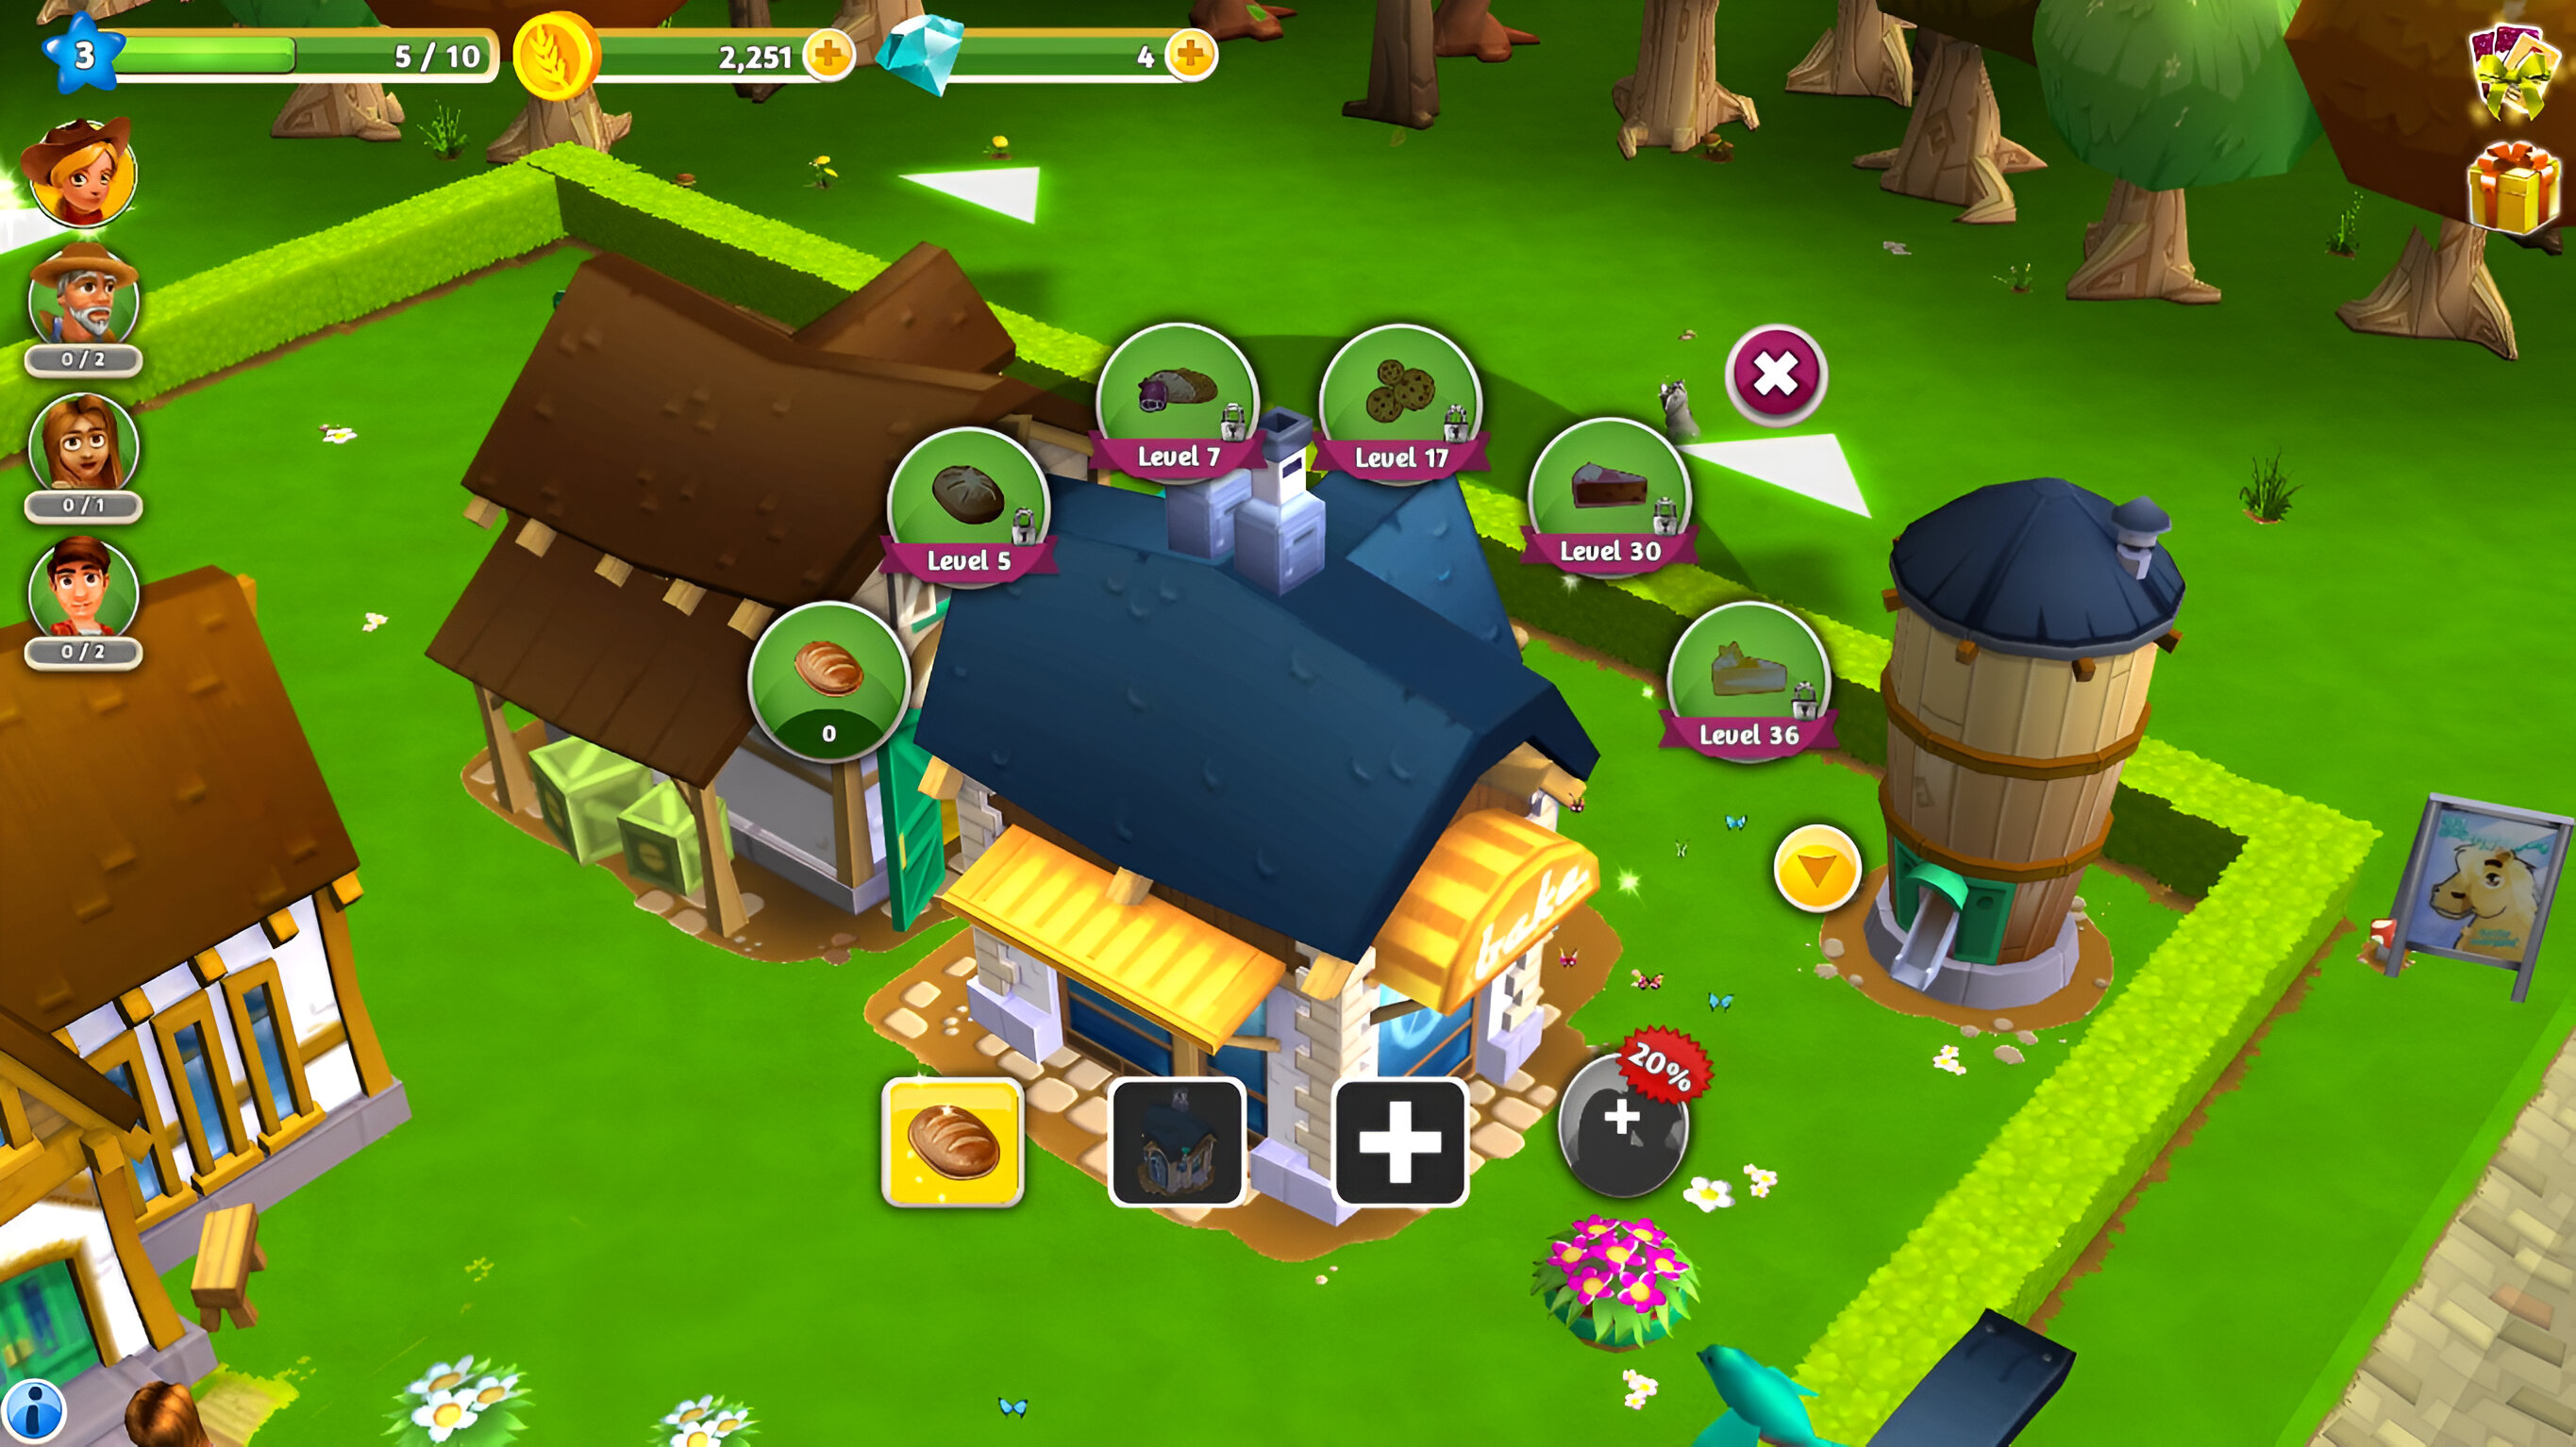 Image My Free Farm 2 - Play Free Multiplayer Online Strategy and Simulation Game